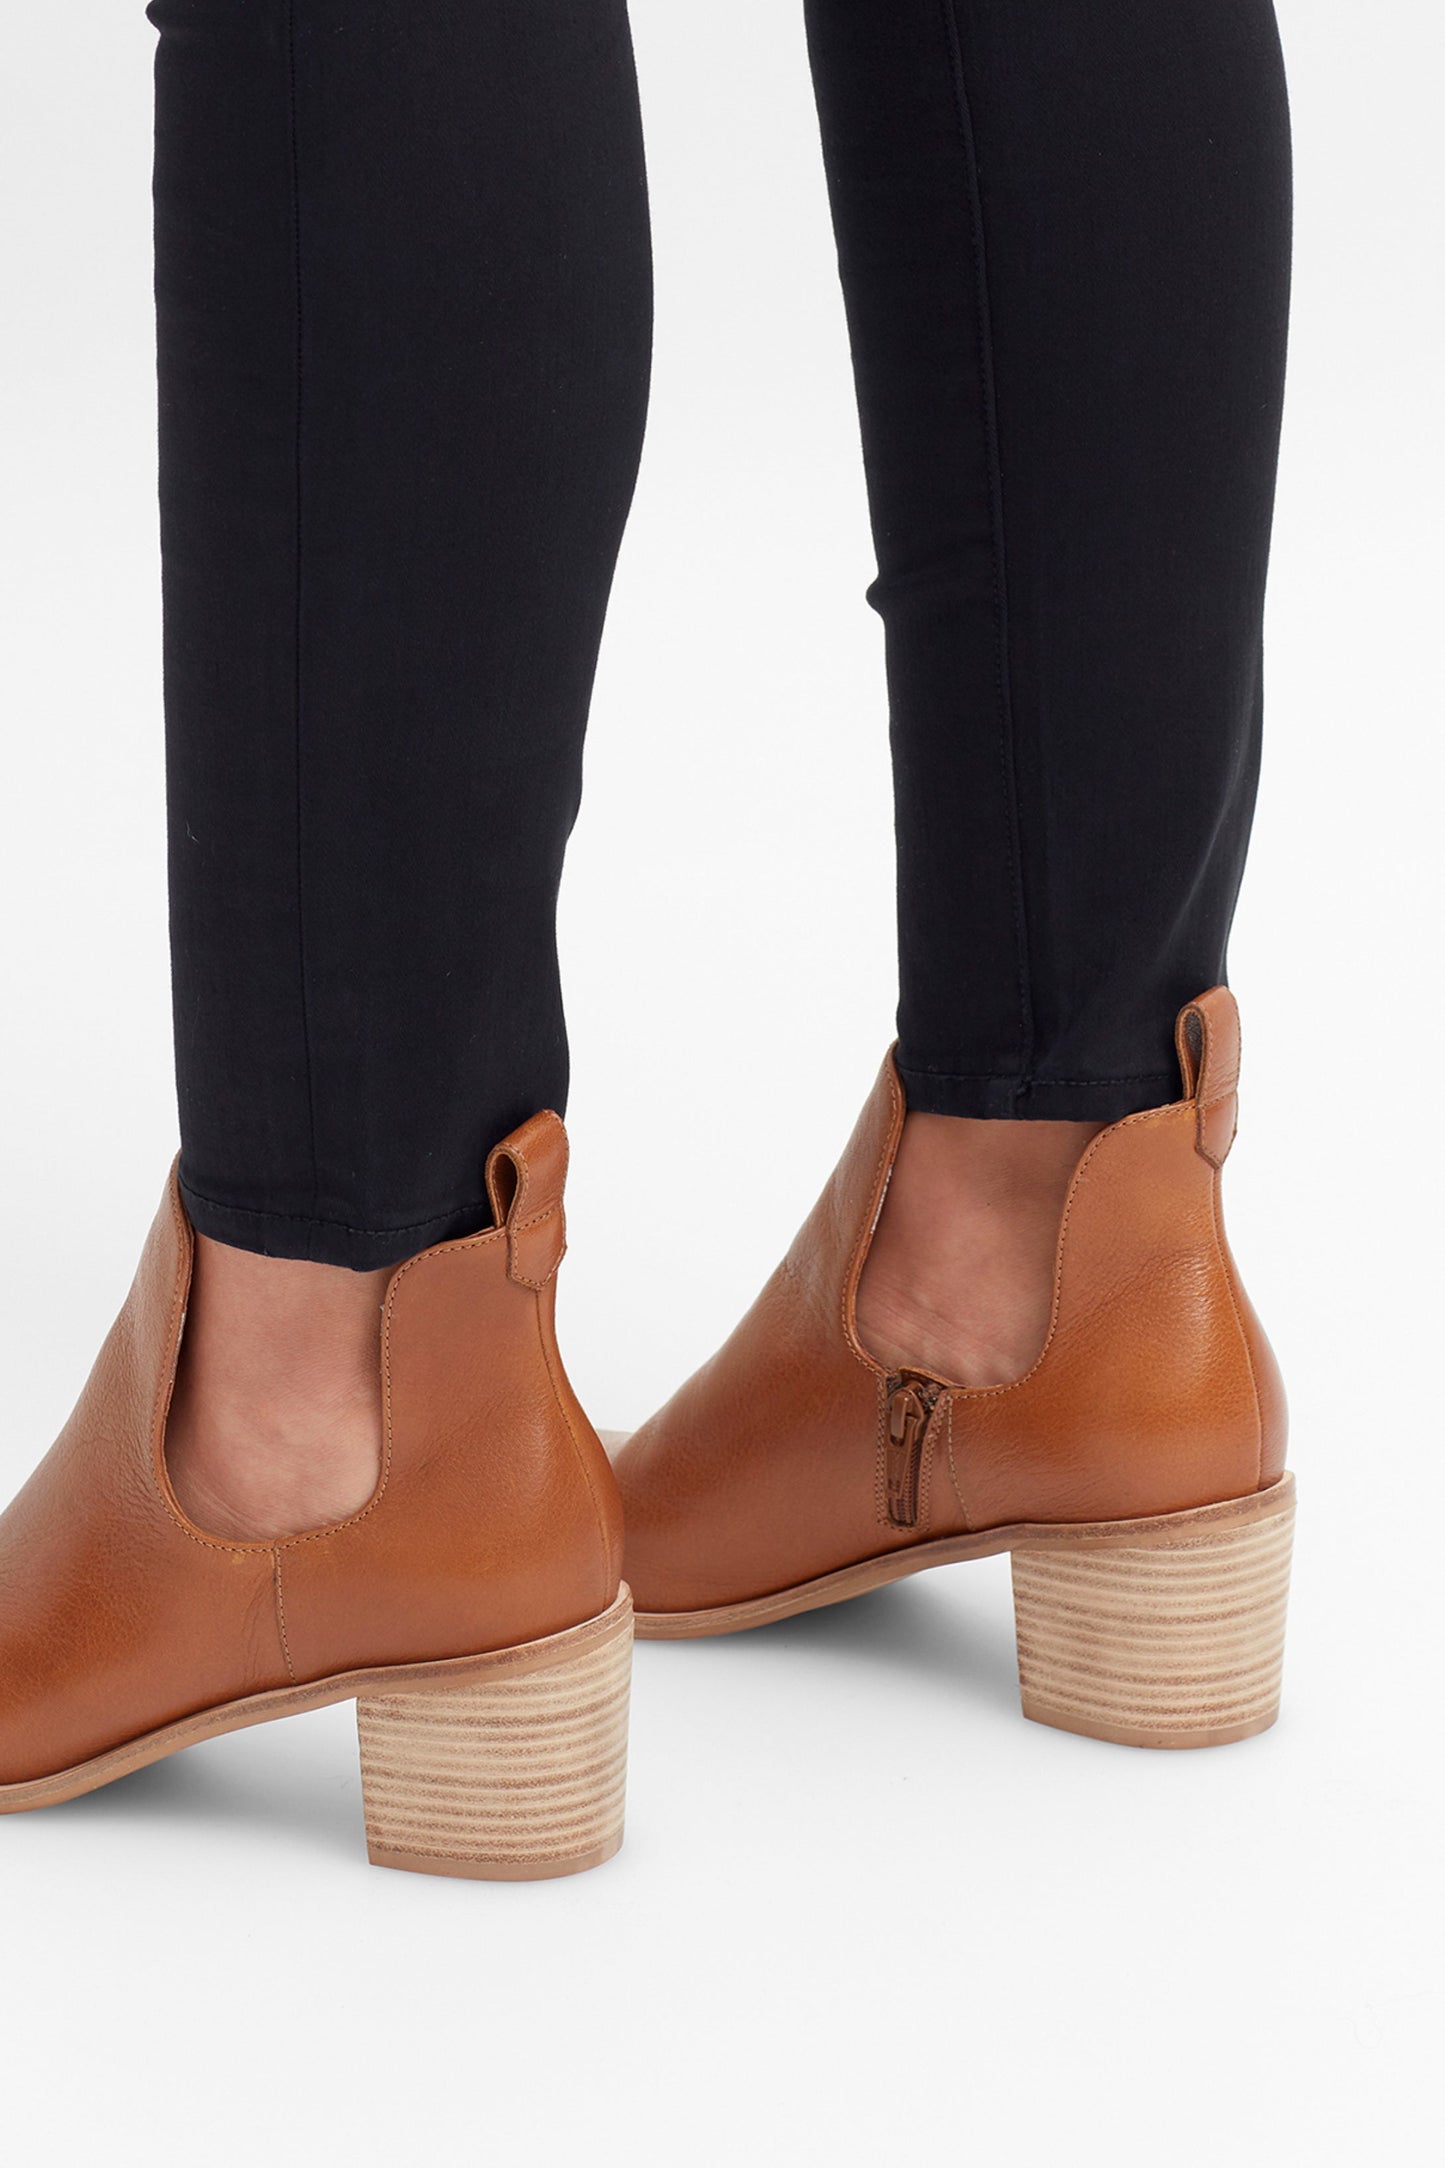 Valla Cut Out Heeled Leather Boot Model Detail | TAN